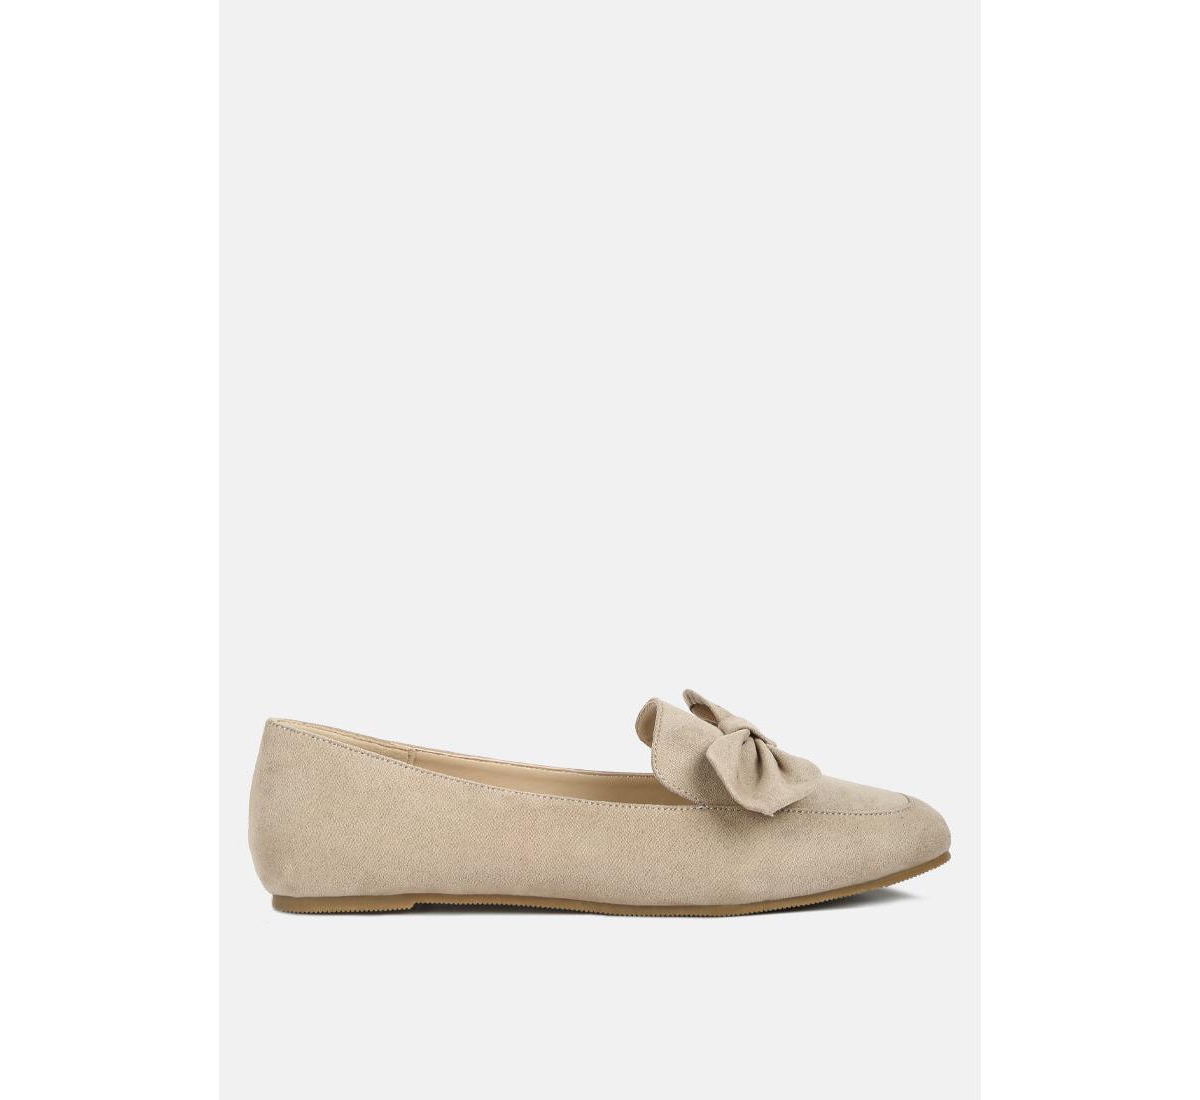 remee front bow loafers - Tan